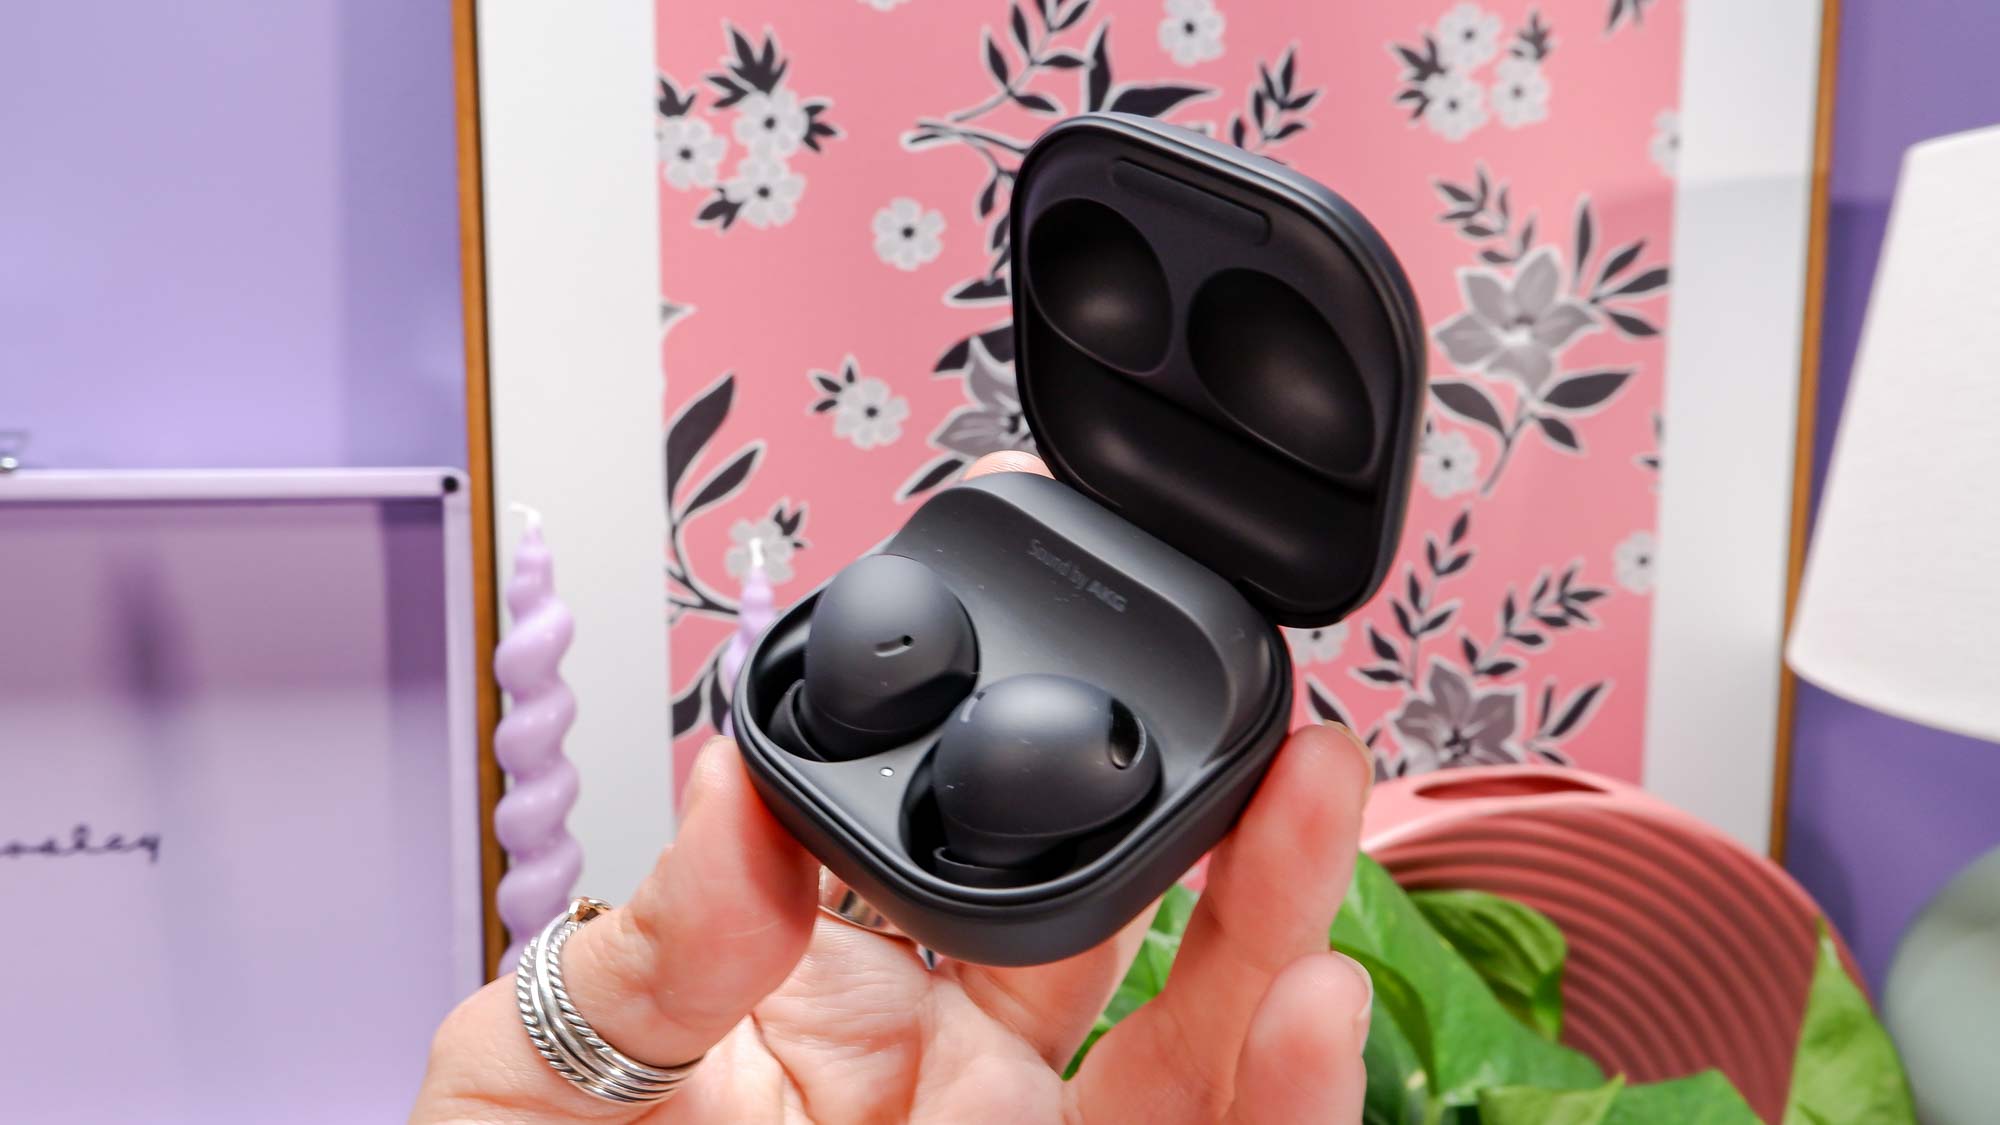 Galaxy Buds Pro 2 in black, in handy charging case